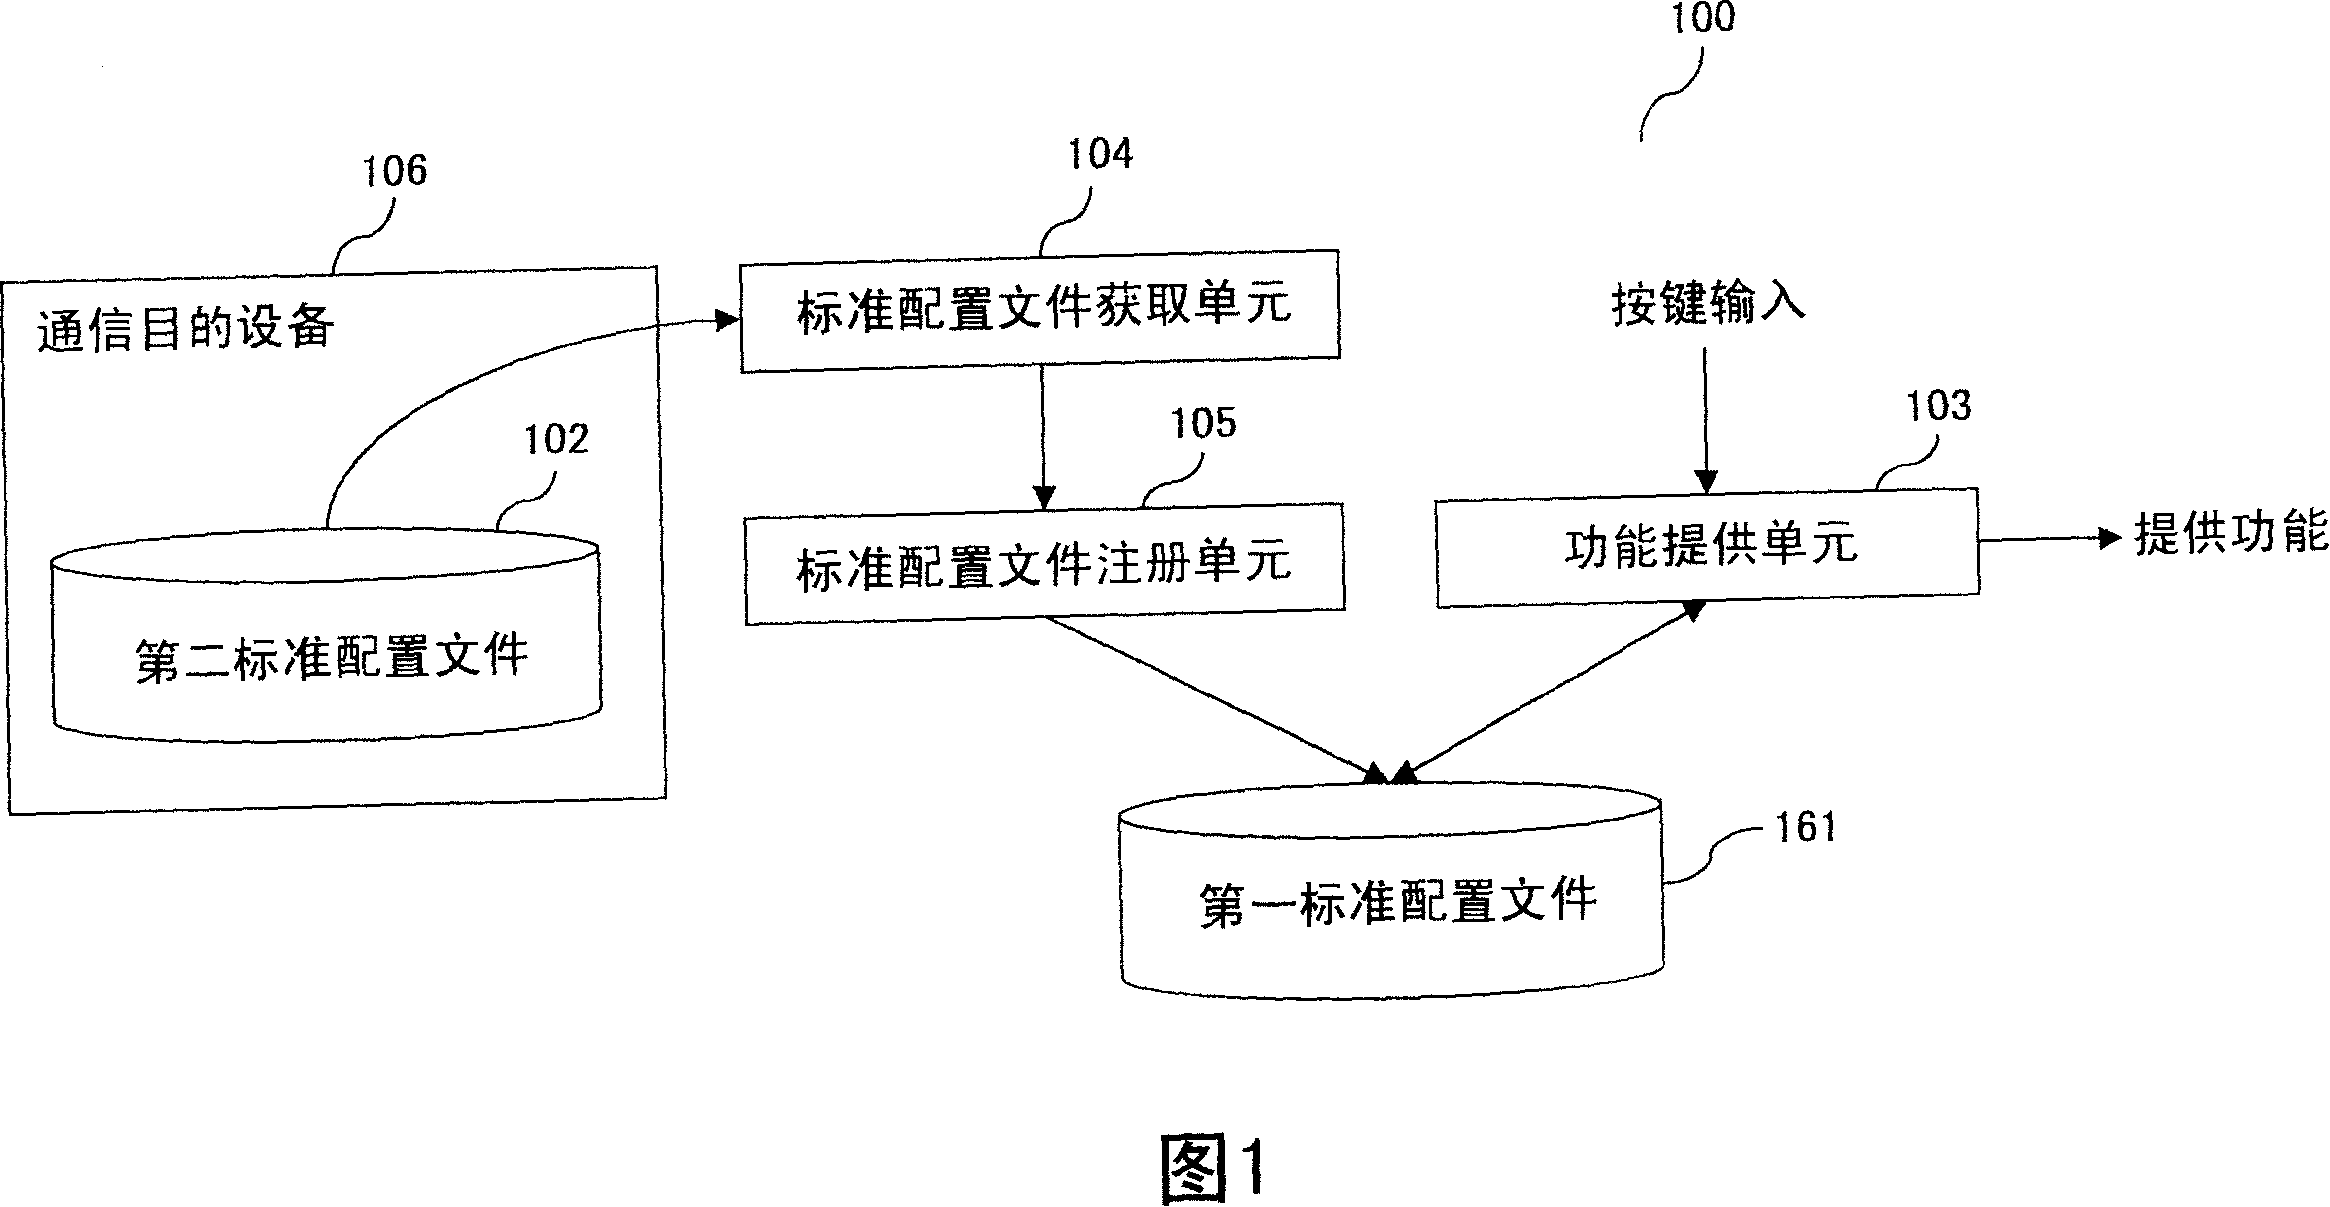 Key assignable portable terminal device